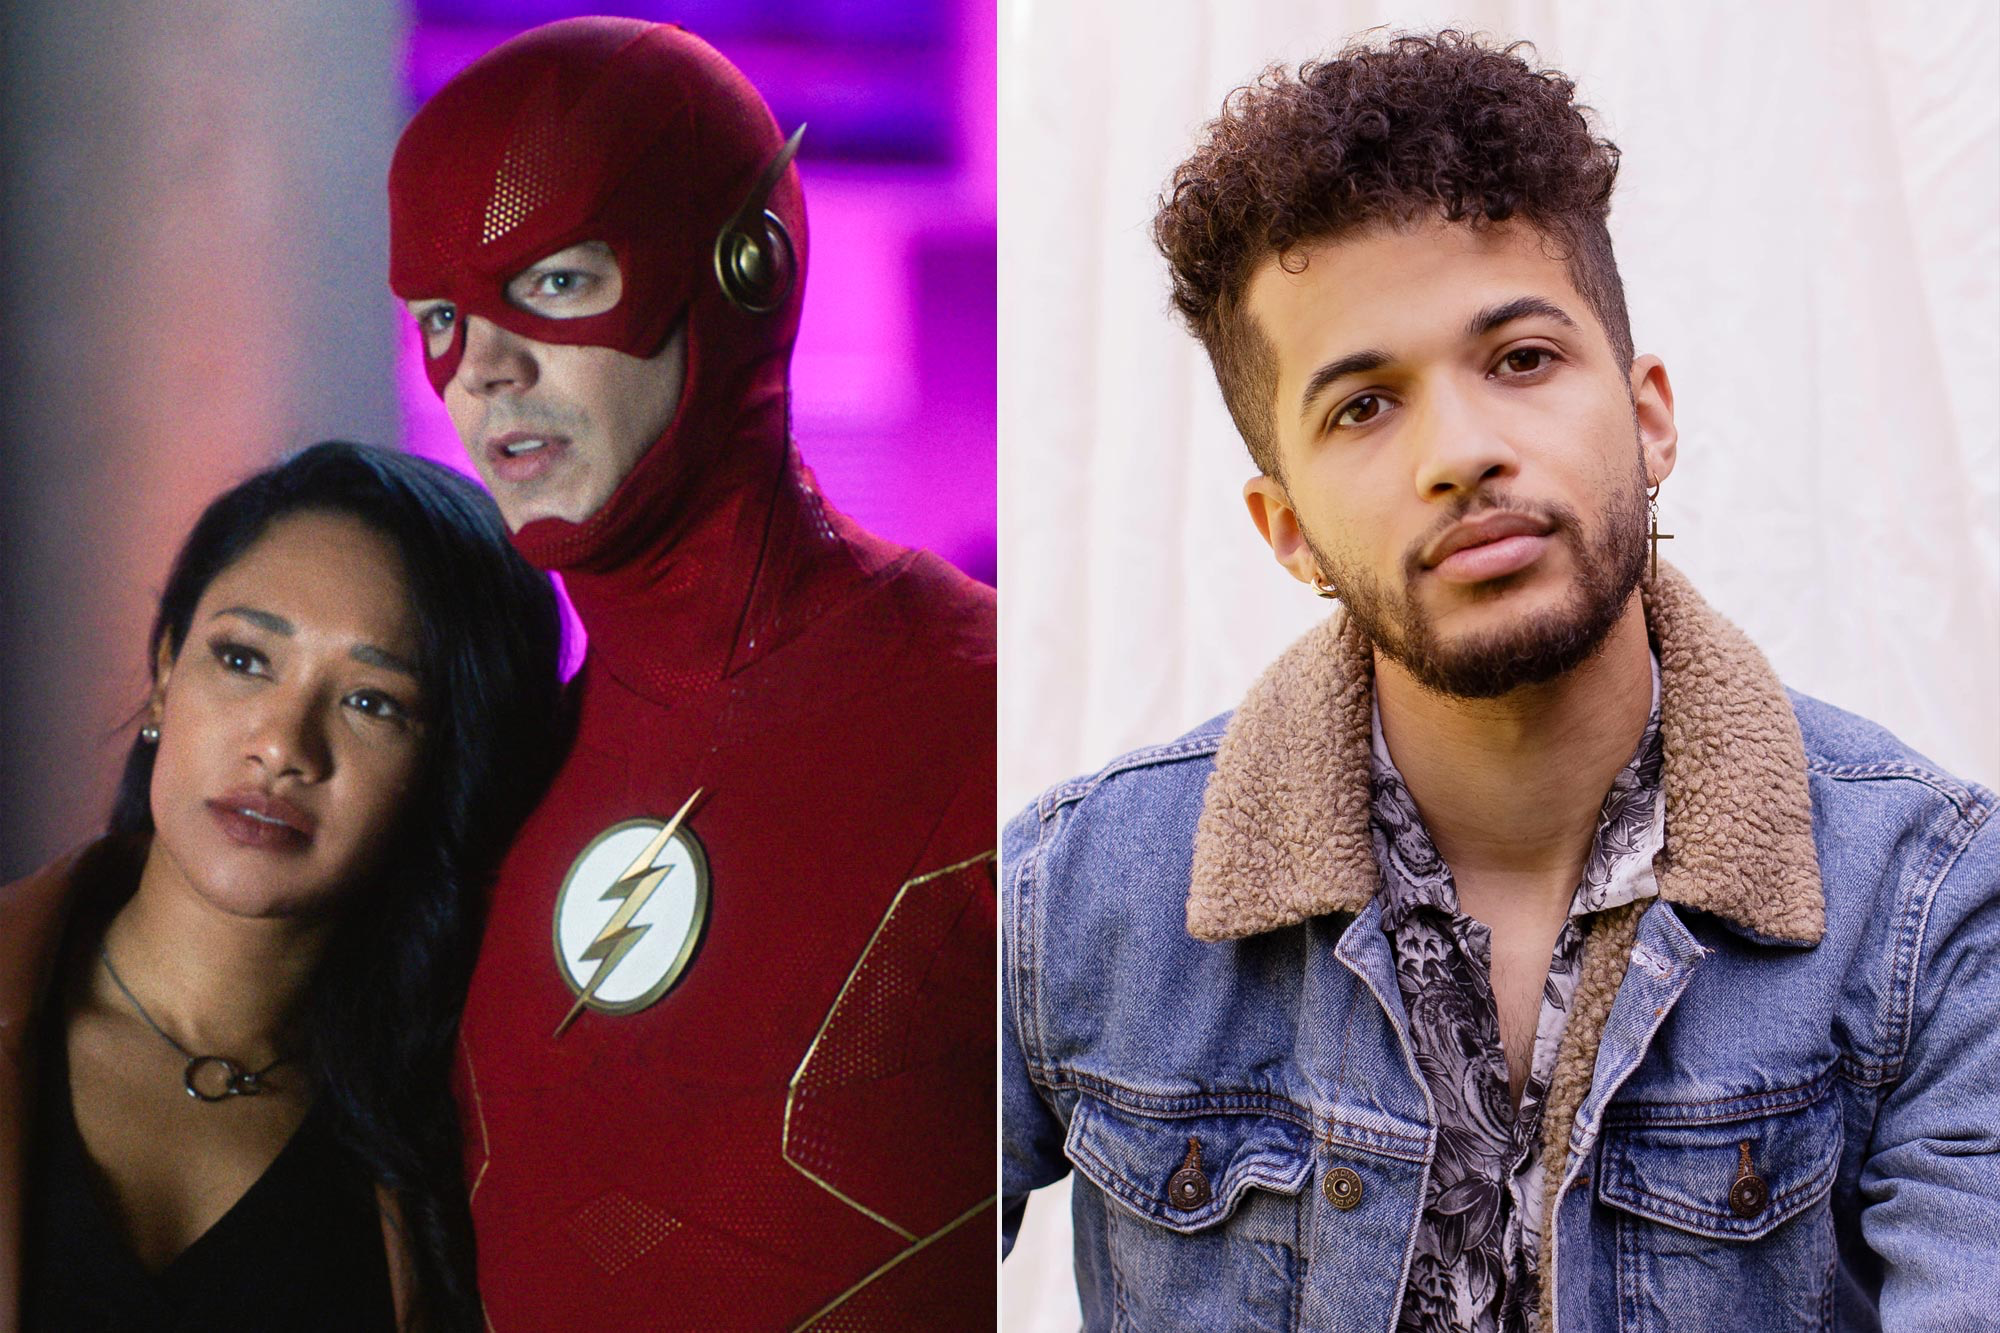 The CW Welcomes Jordan Fisher to the cast of 'The Flash'